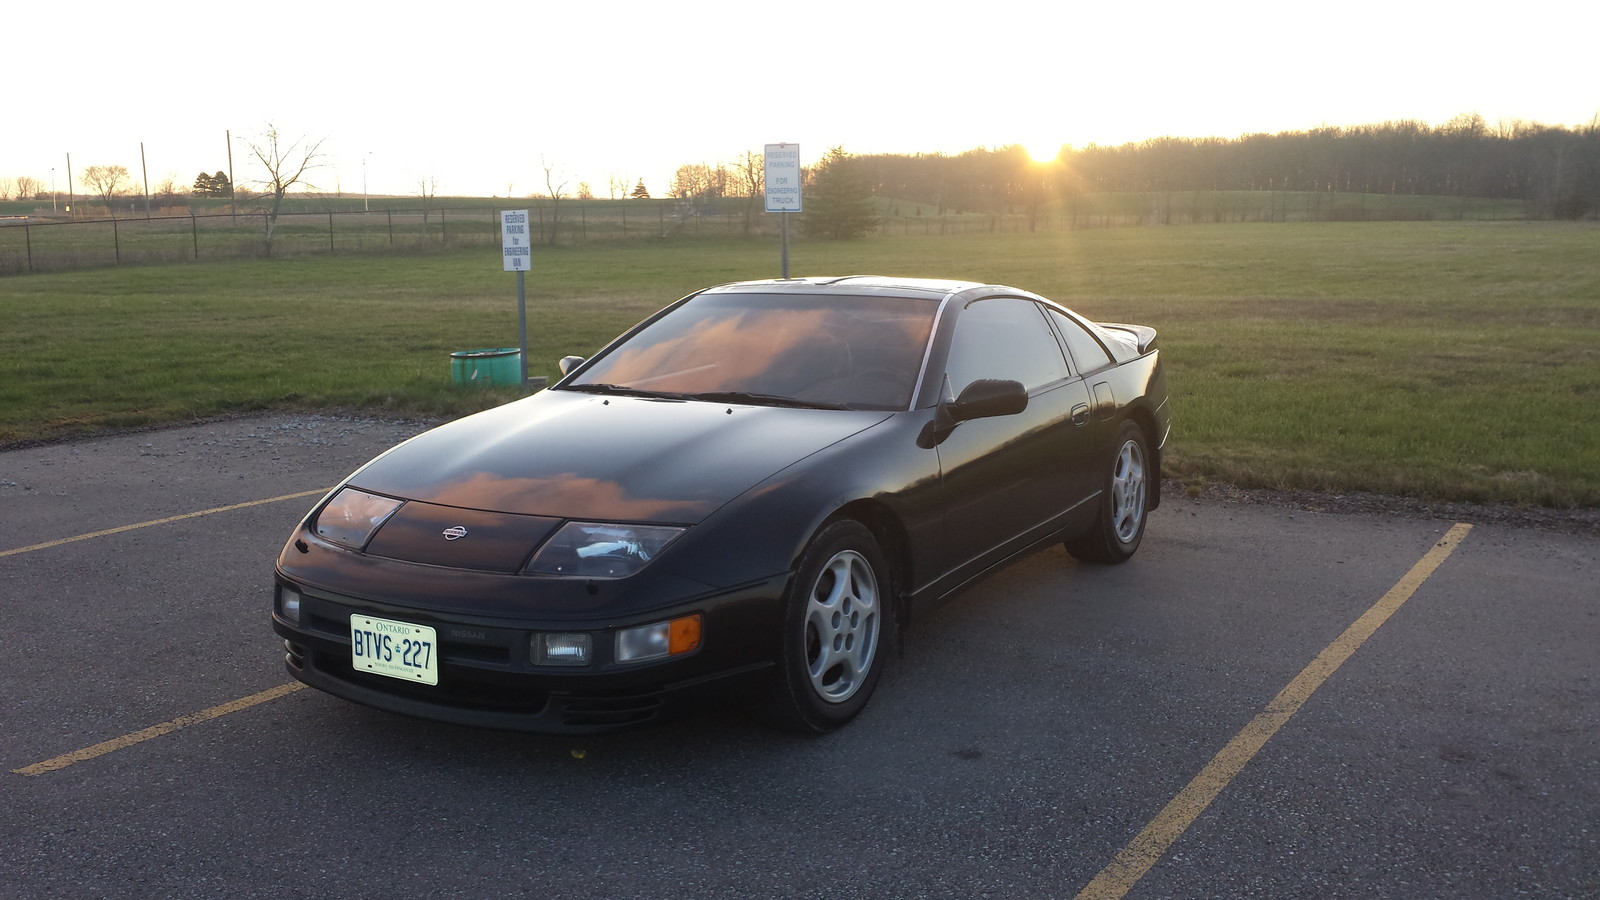 Nissan 300zx 1/4 mile time